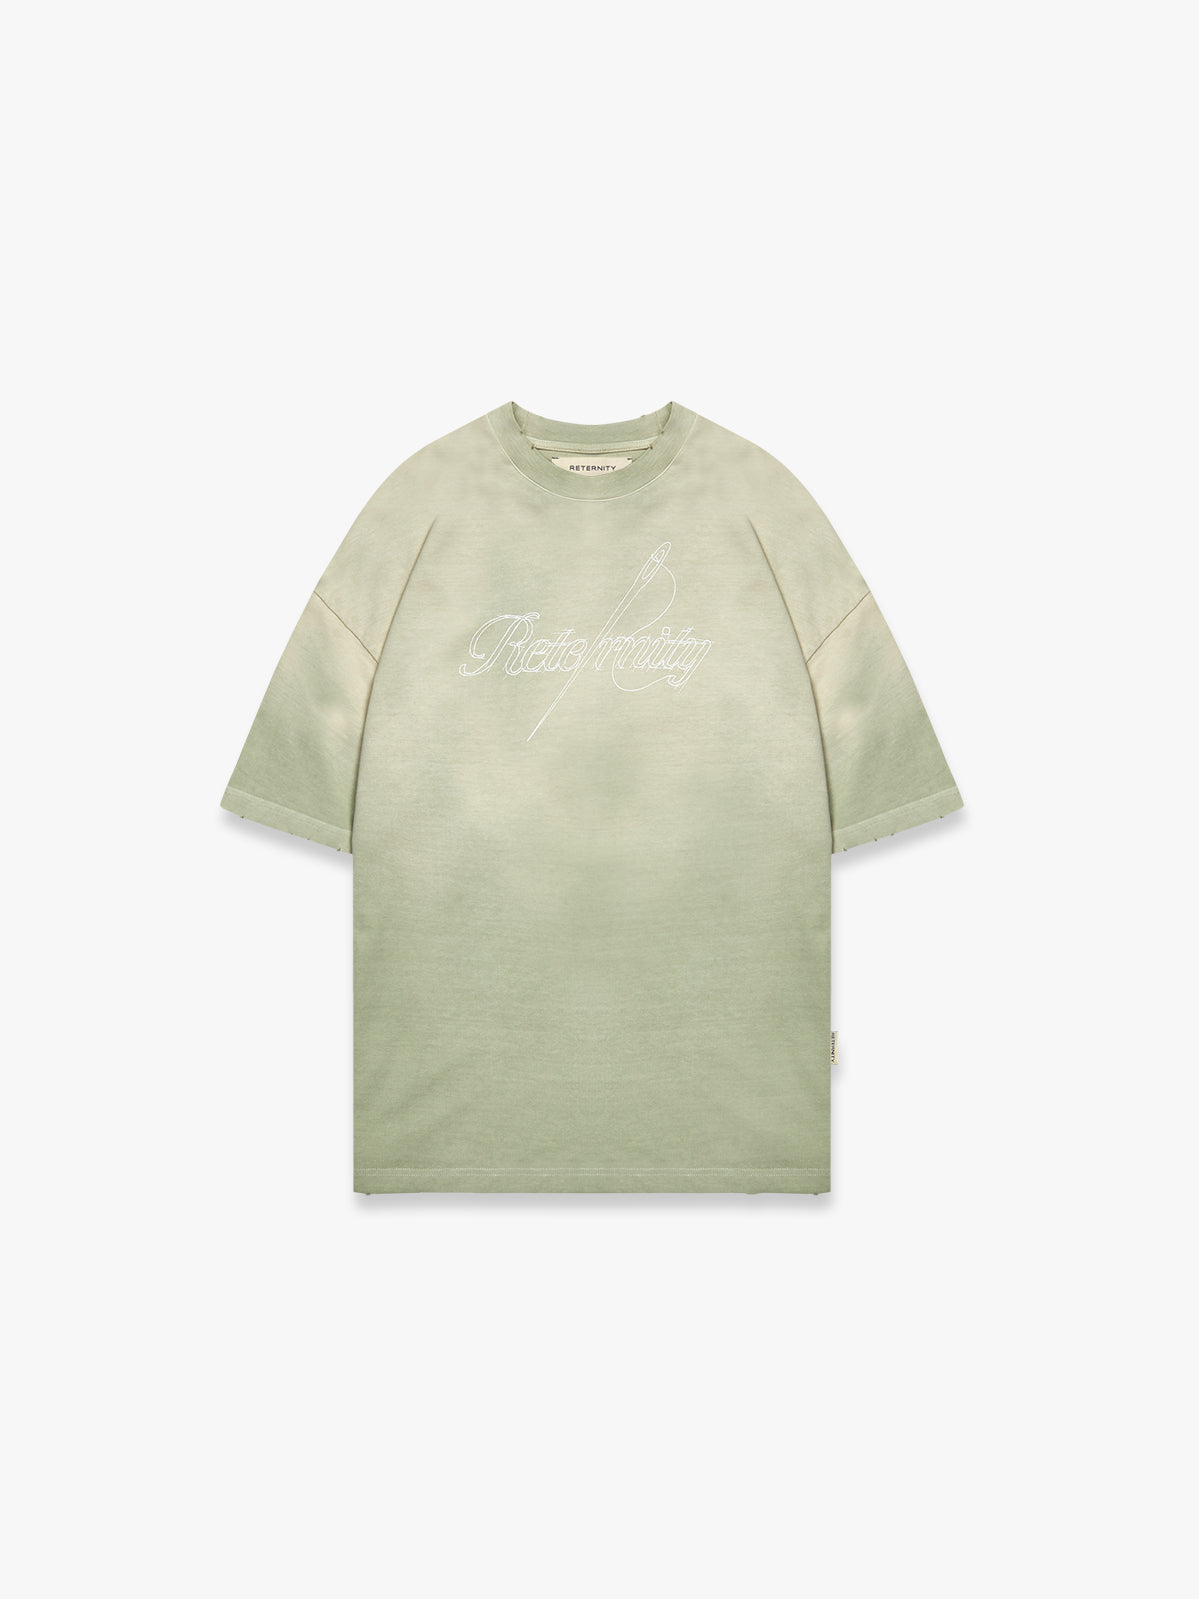 HAND DRAWN T-SHIRT - FADED LIME